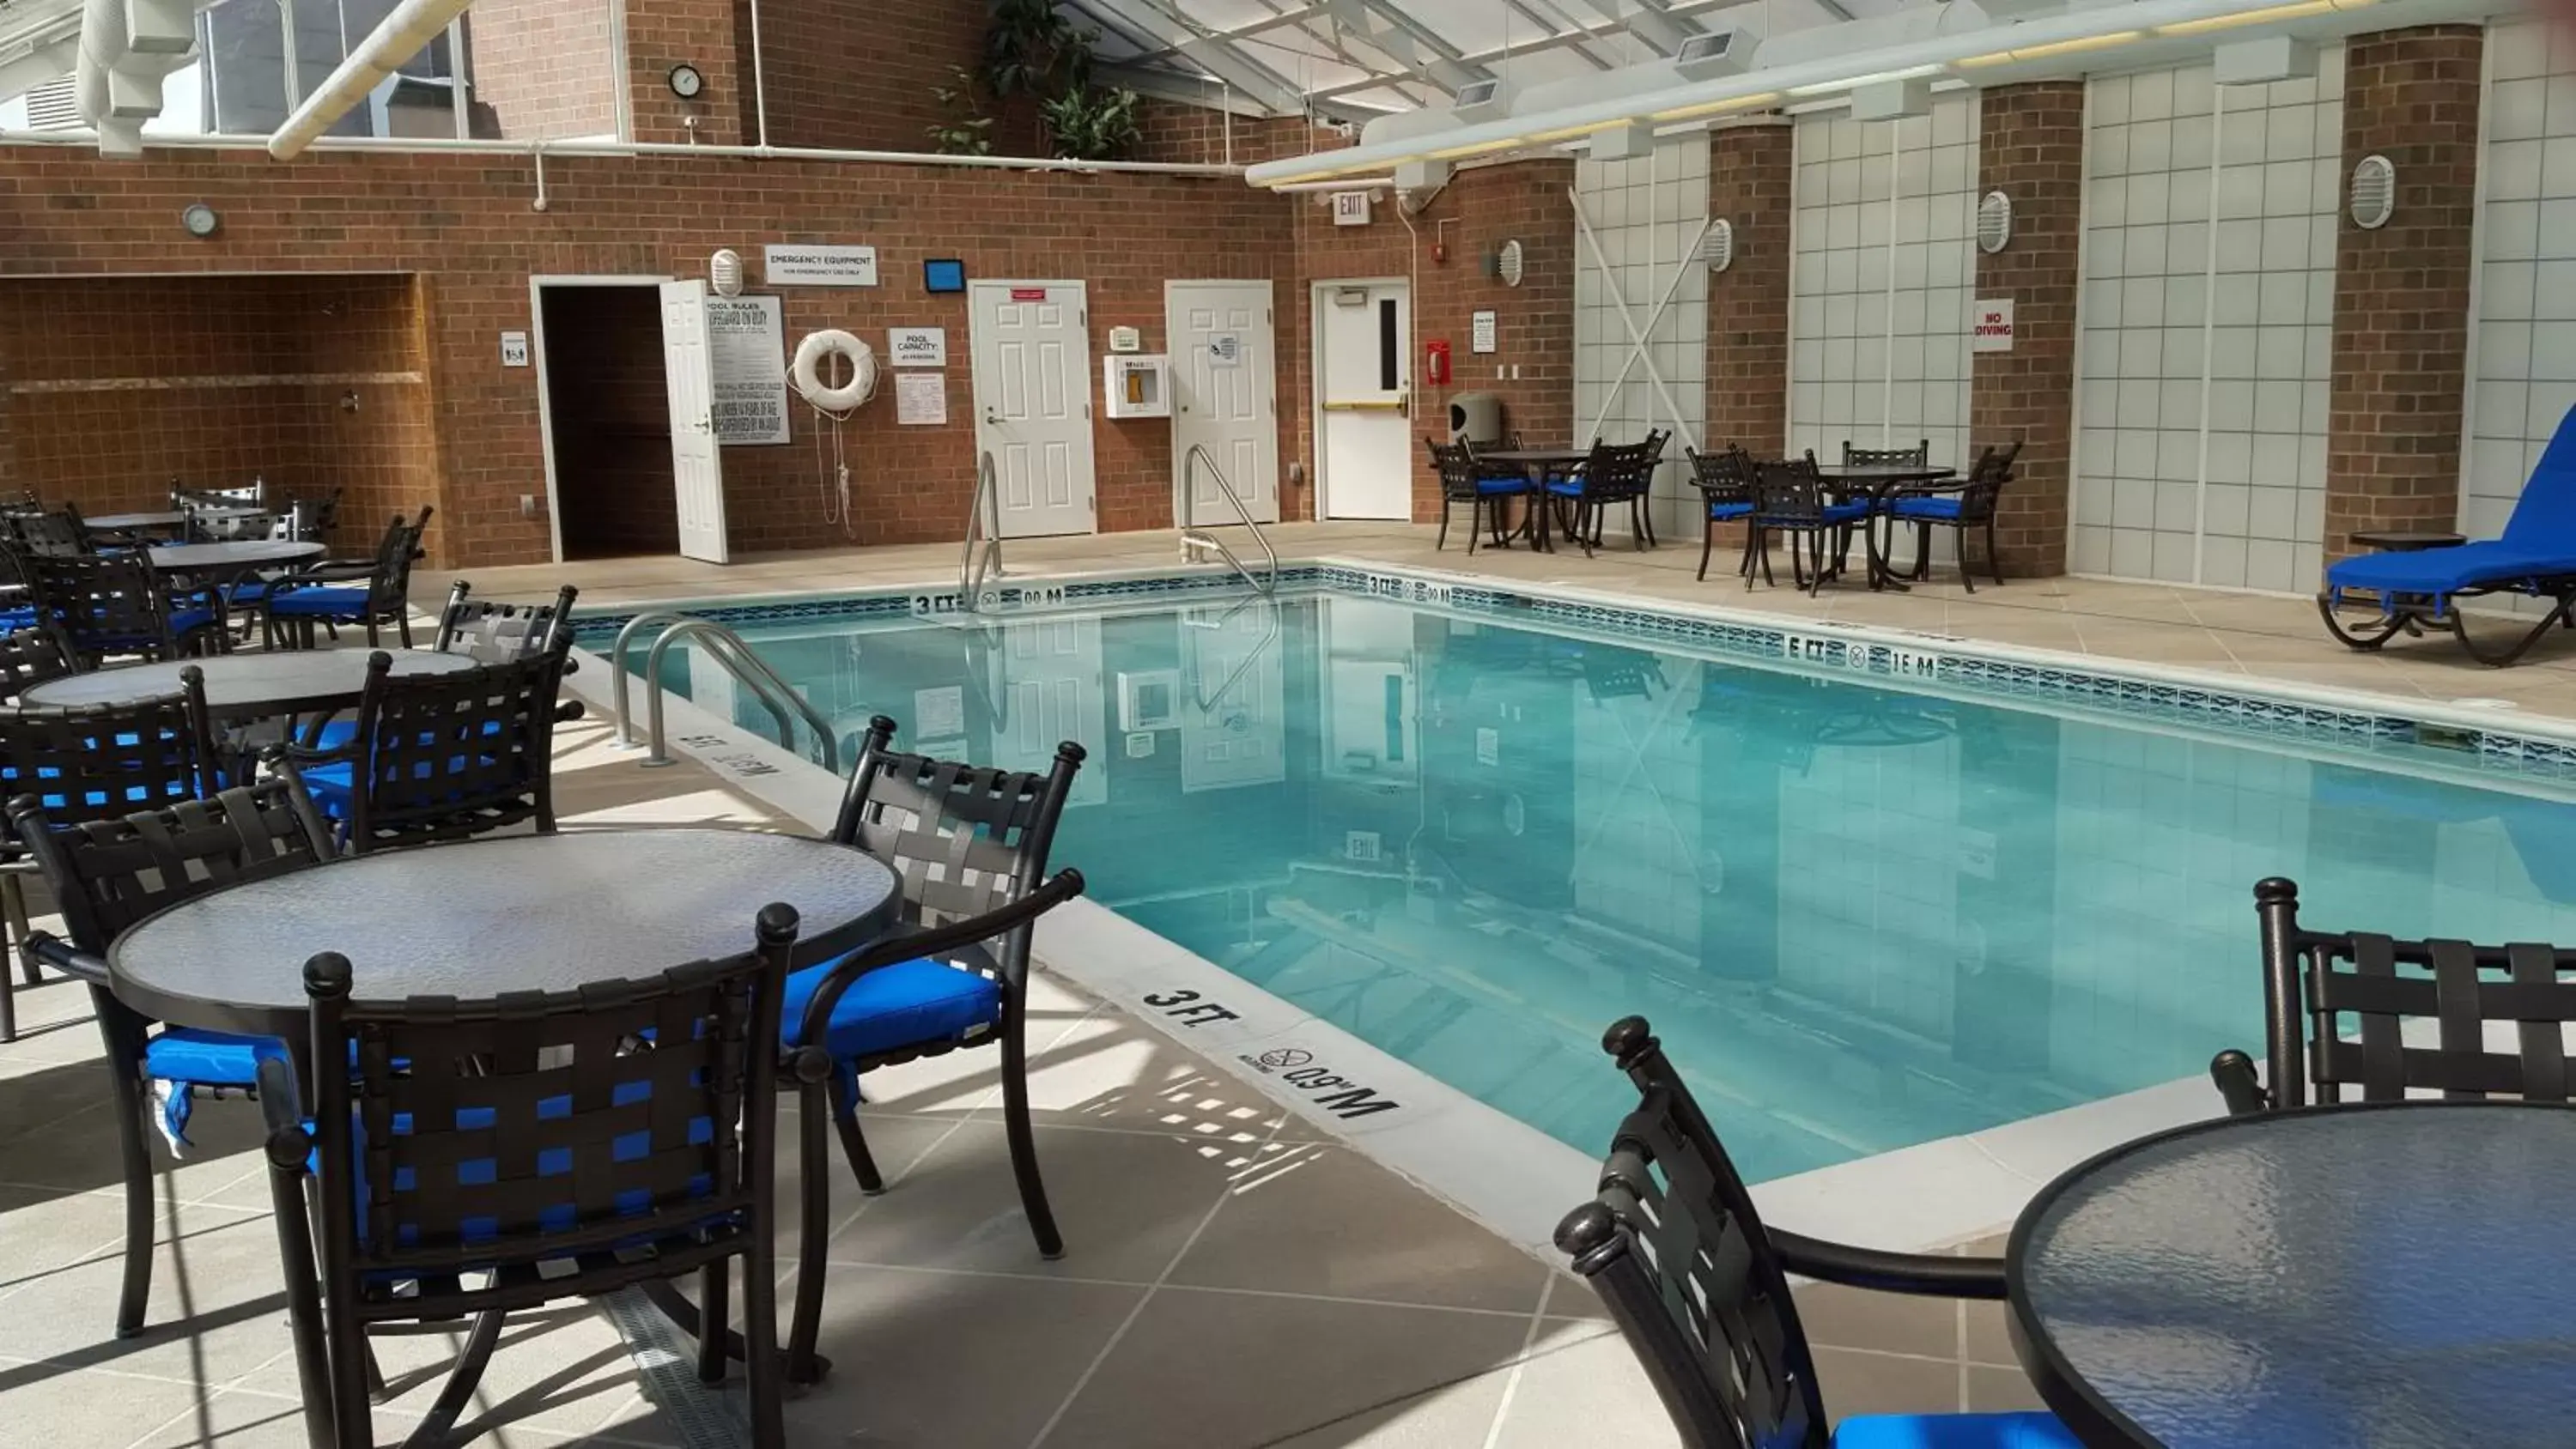 Swimming Pool in Varsity Clubs of America South Bend